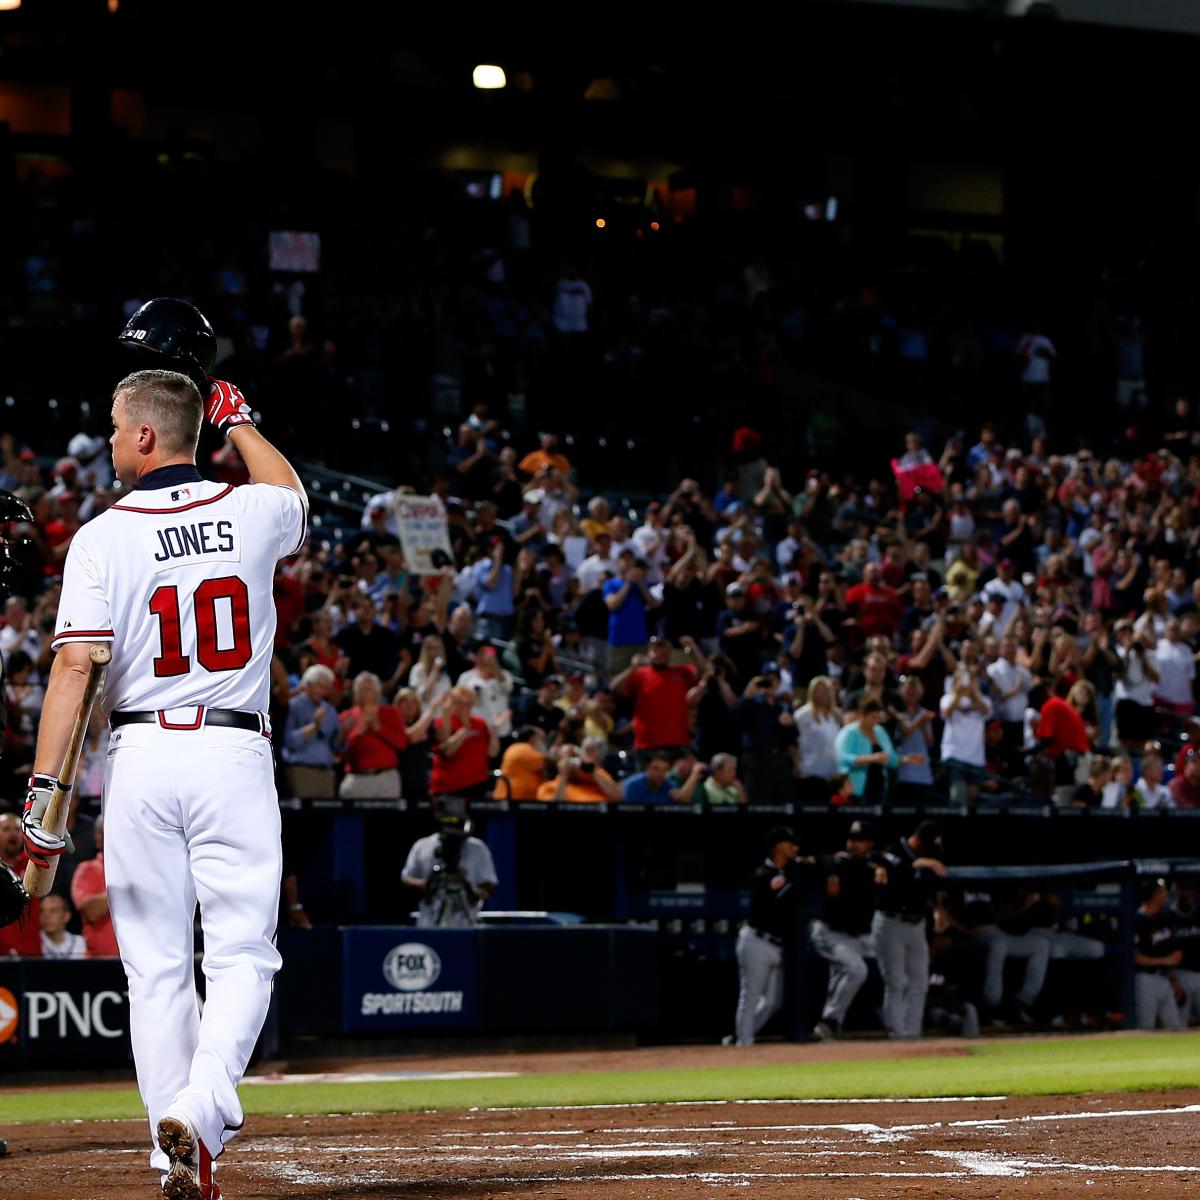 Braves new world: Despite losing Chipper Jones, things are looking